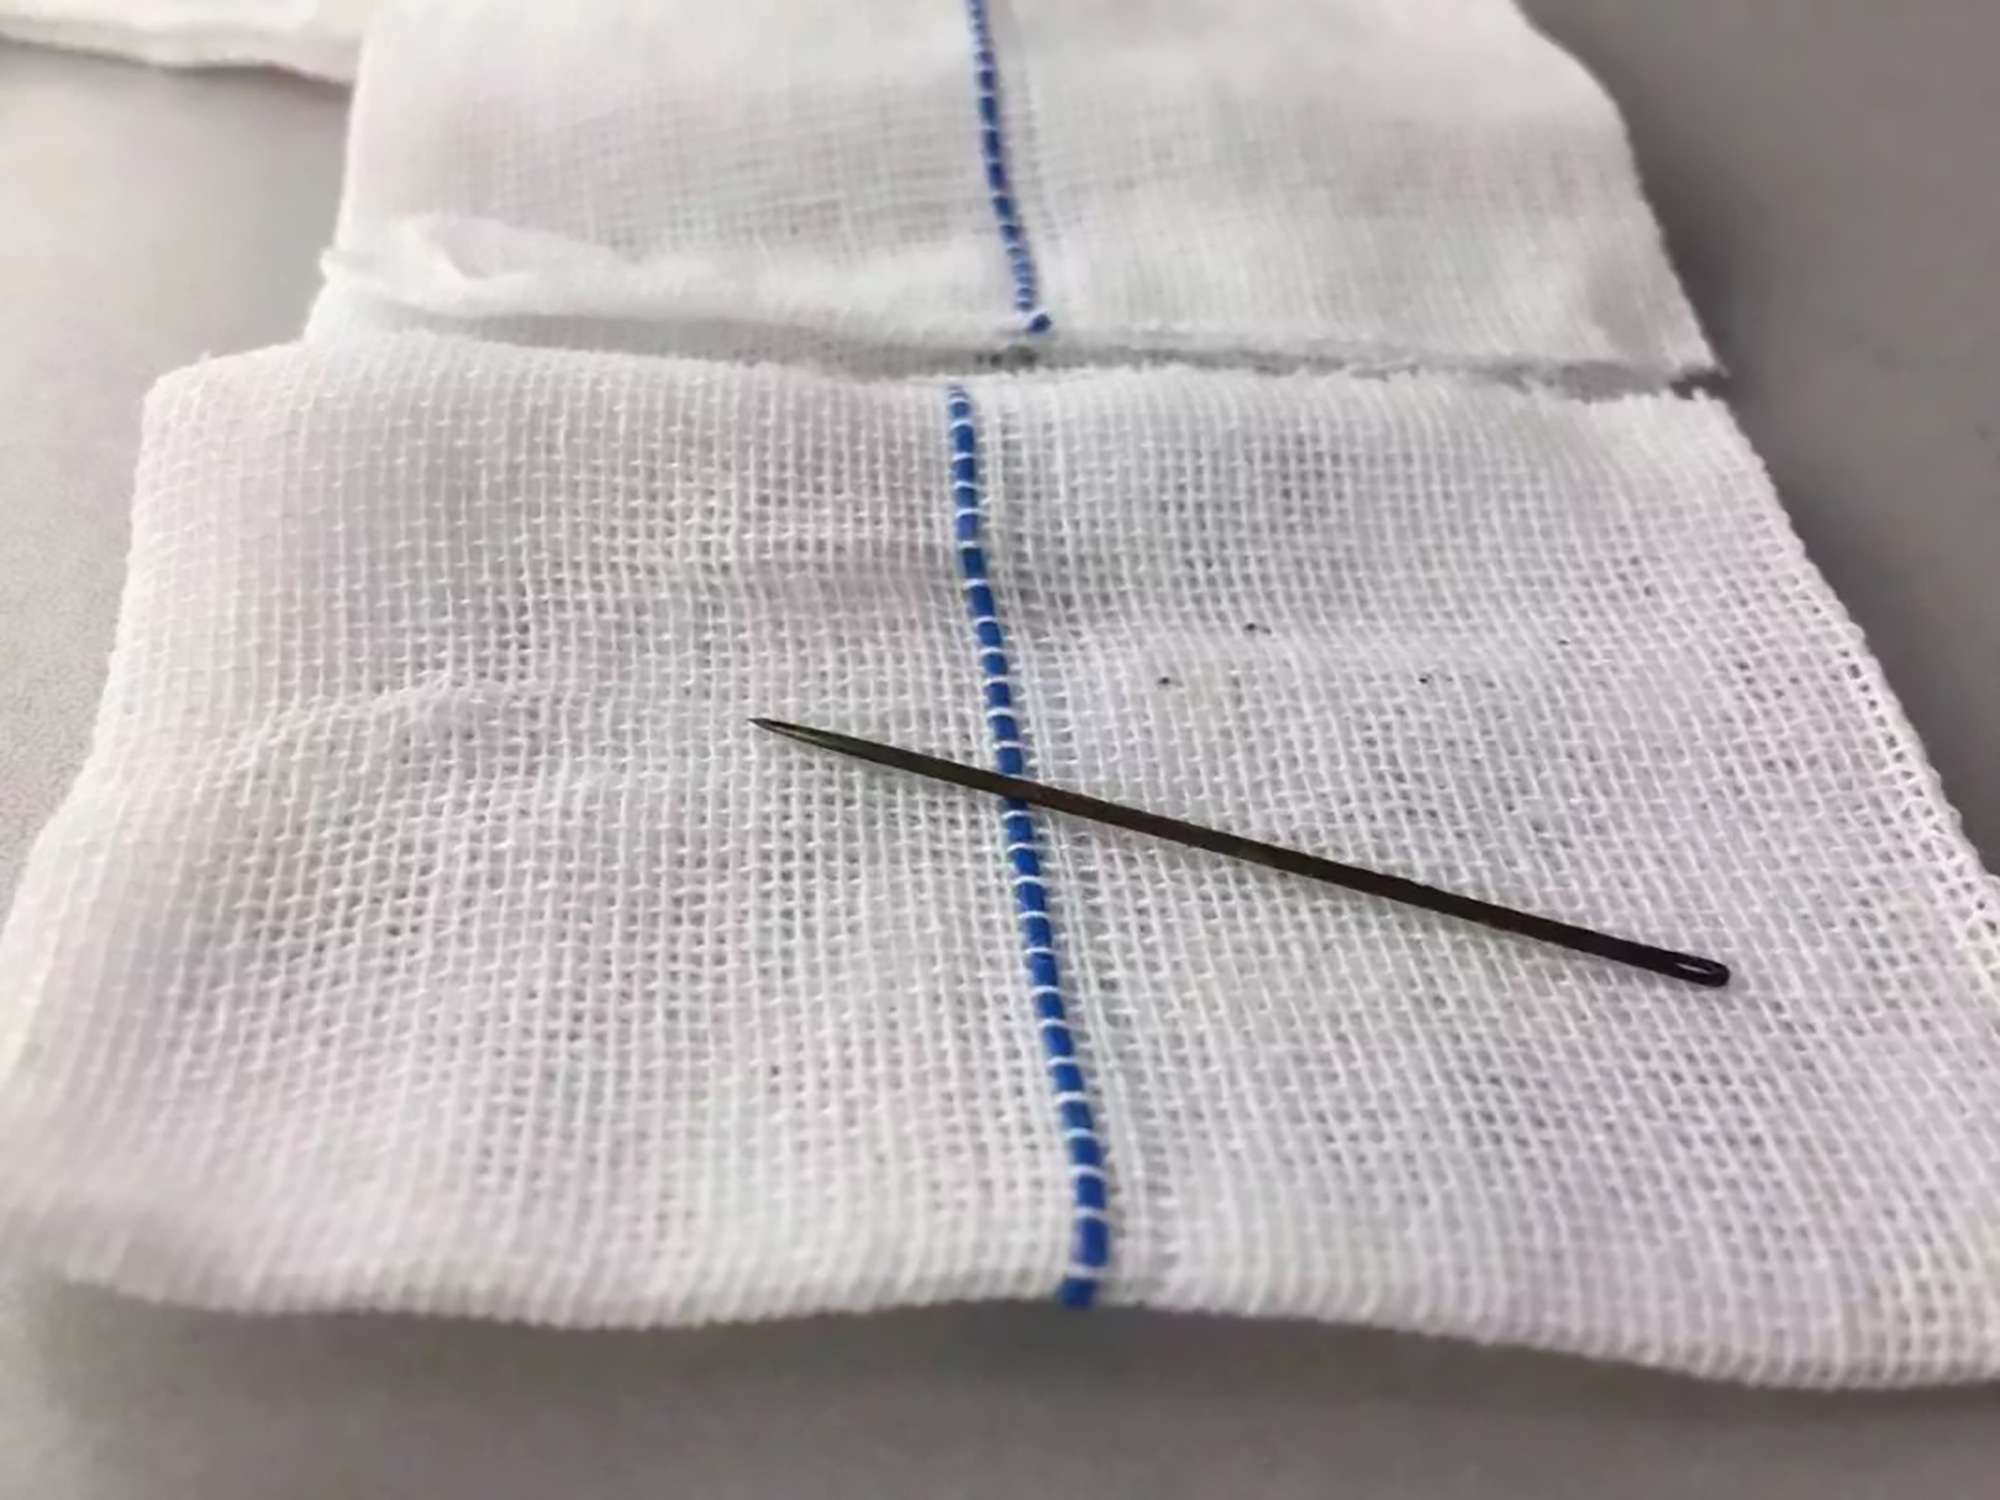 Read more about the article Boy, 11, Loses Rusty Sewing Needle Up Penis